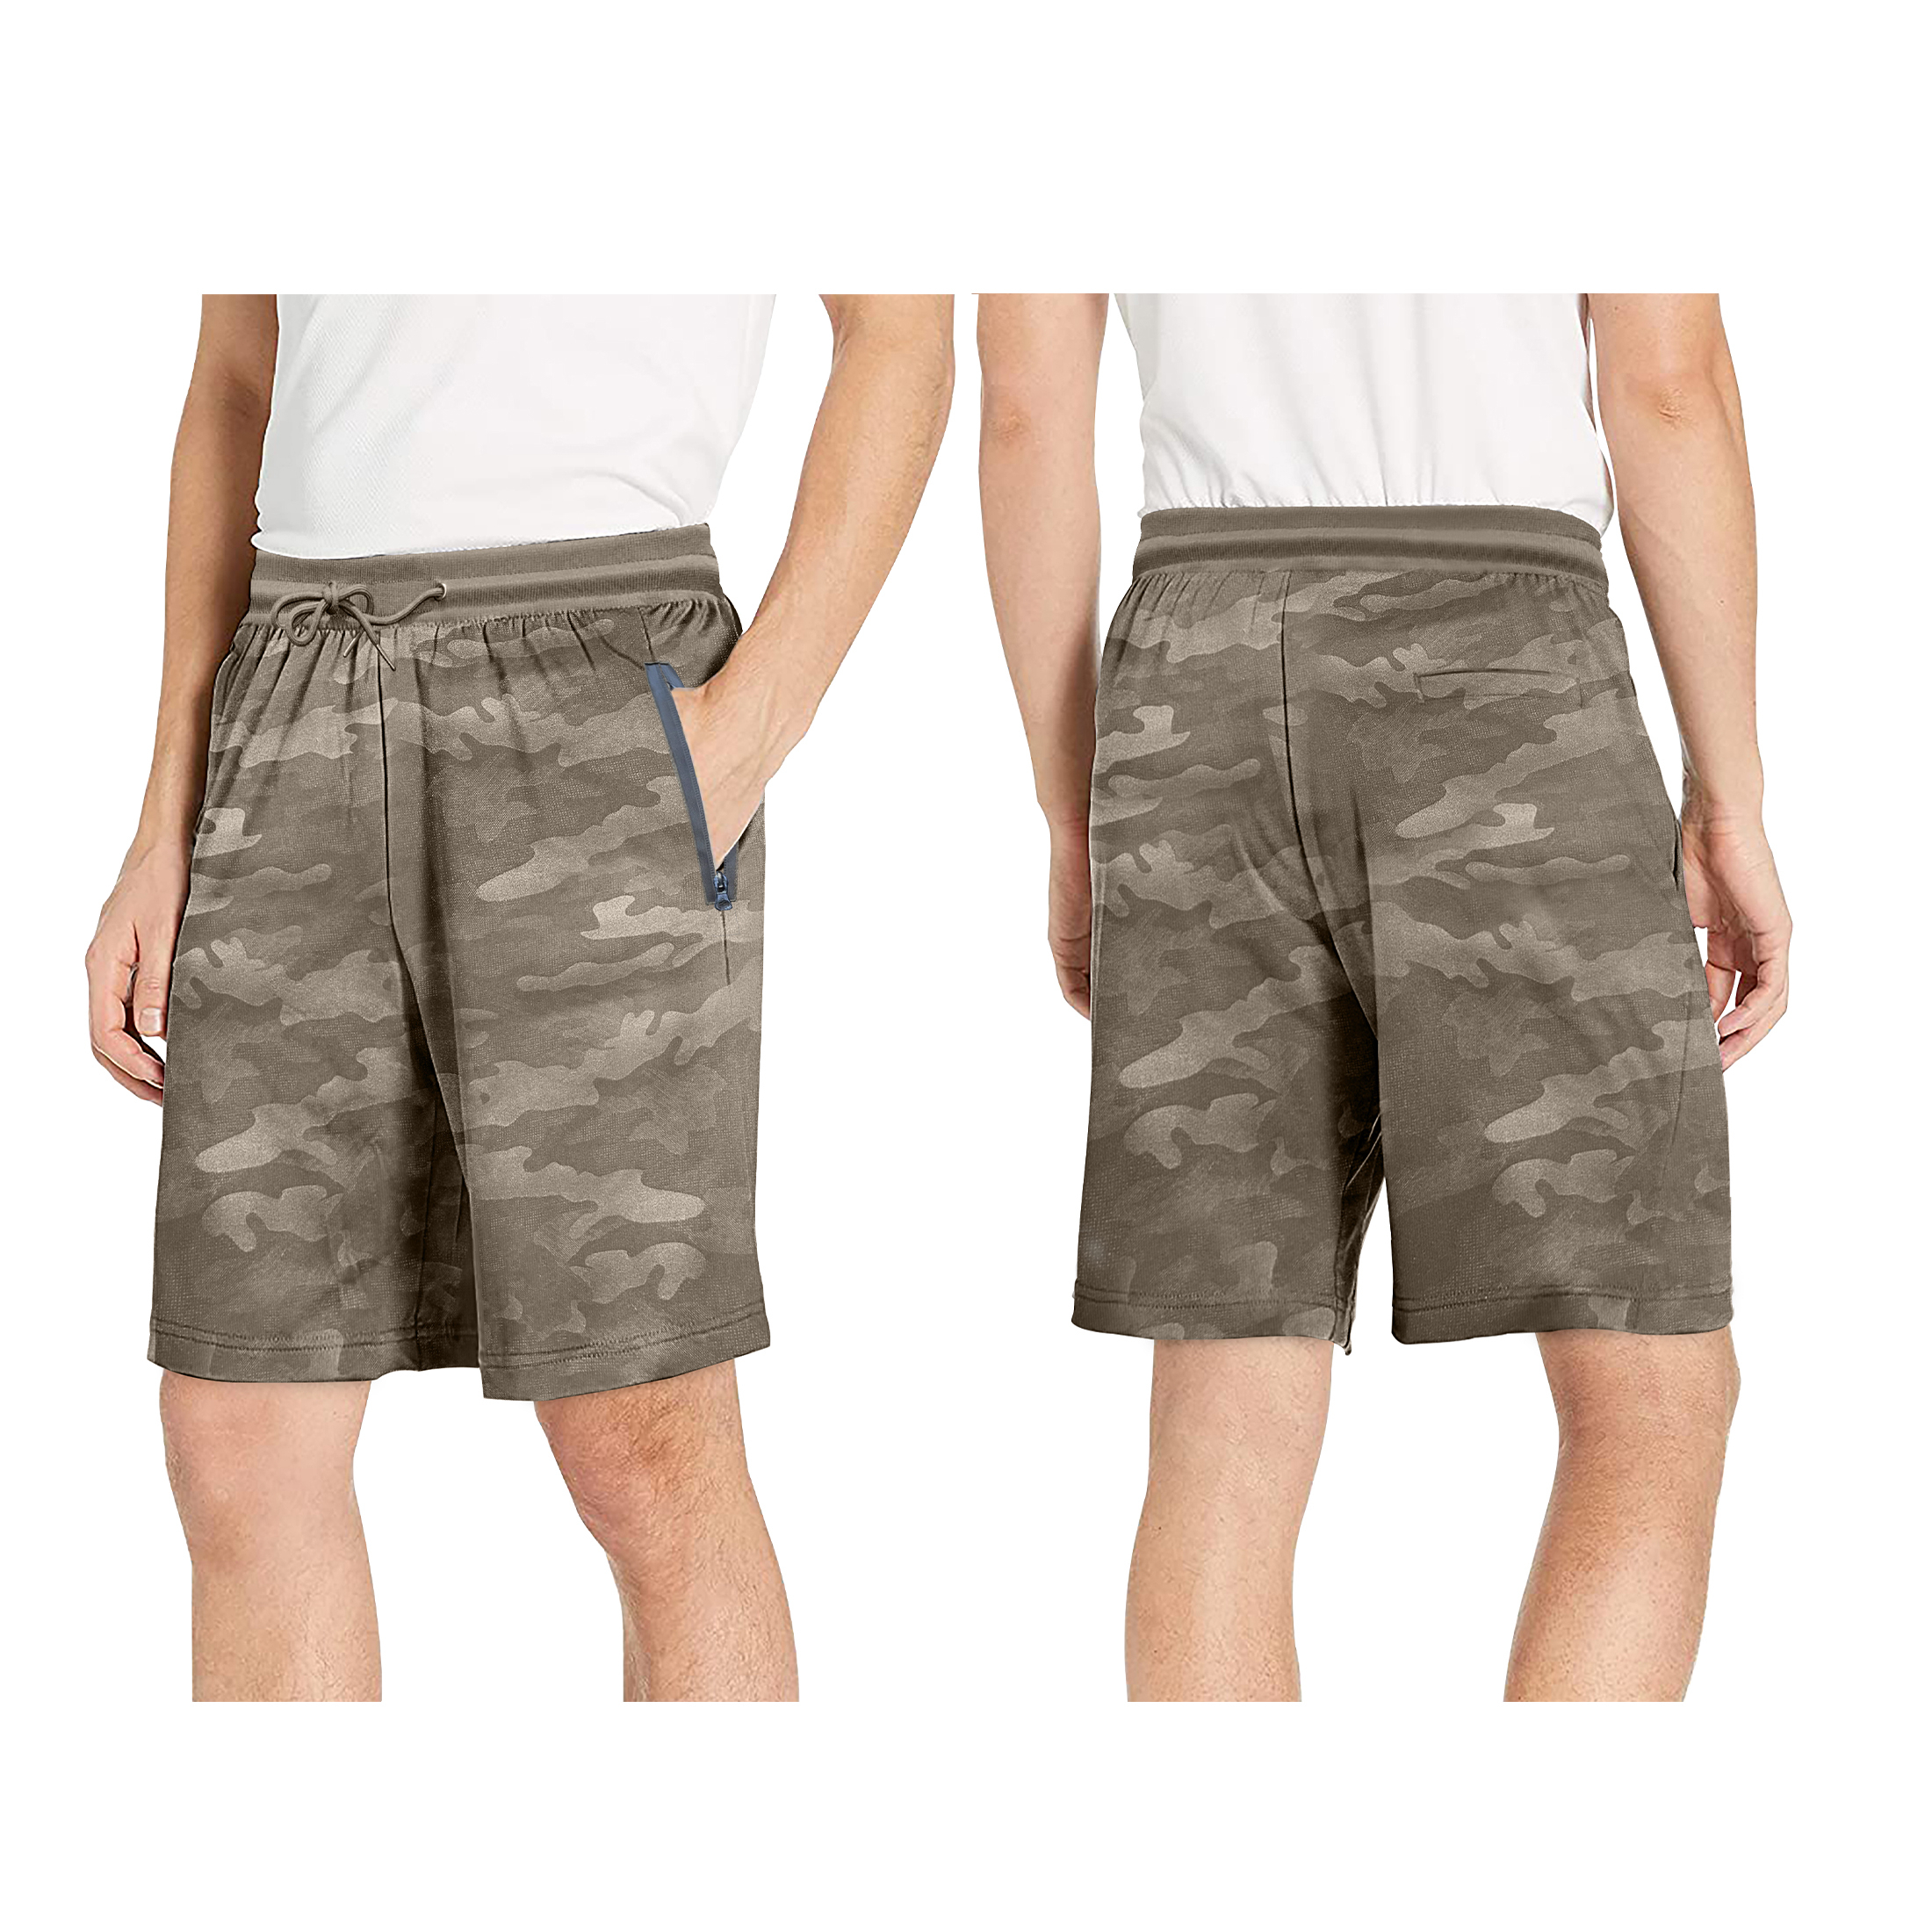 Men's Quick Dry Camo-Print Athletic Performance Active Running Scuba Shorts - Olive, XX-Large